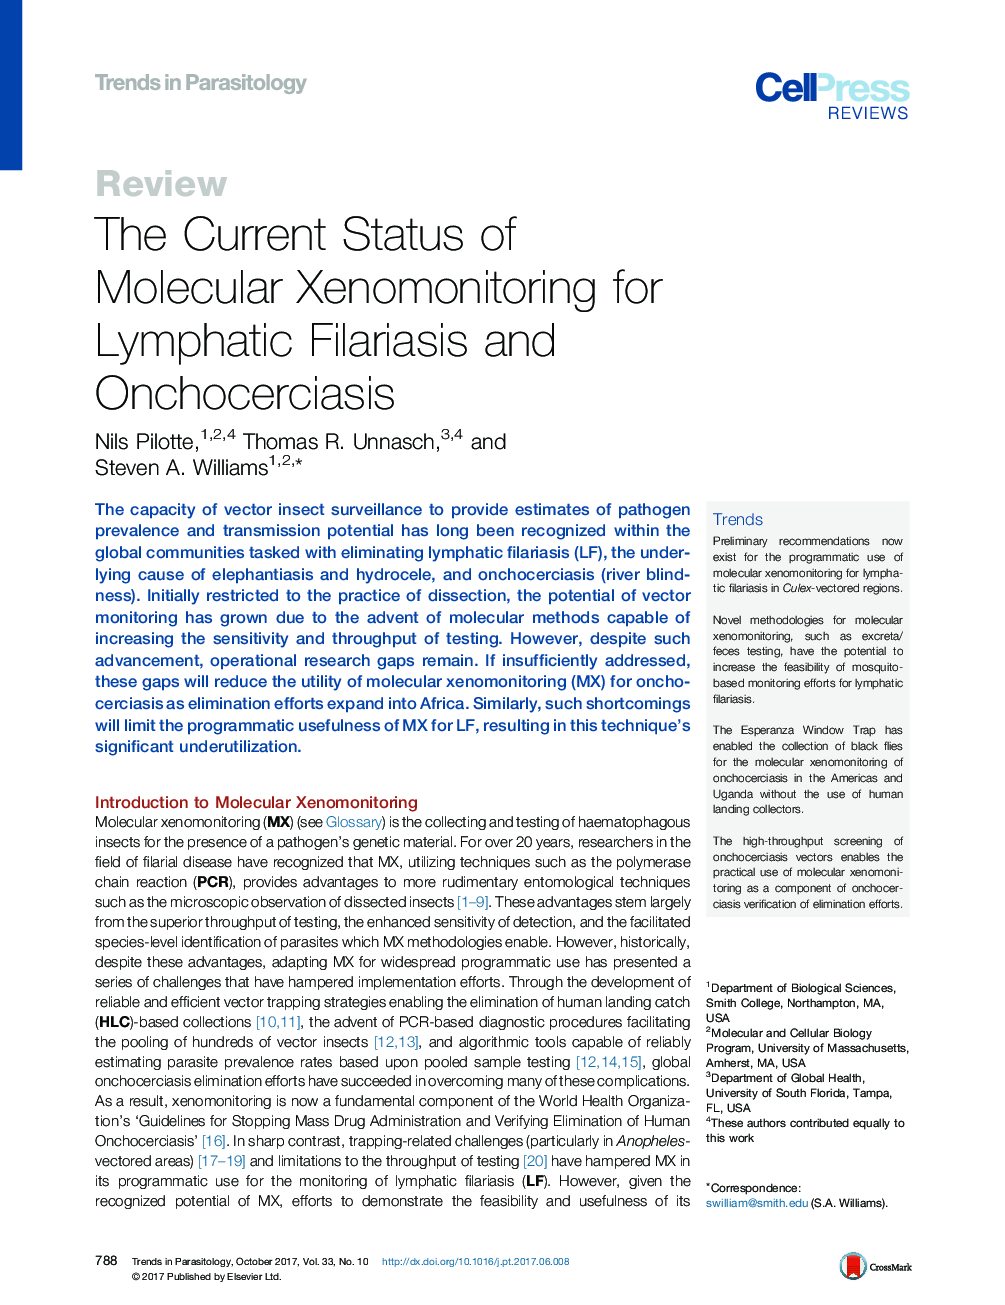 The Current Status of Molecular Xenomonitoring for Lymphatic Filariasis and Onchocerciasis